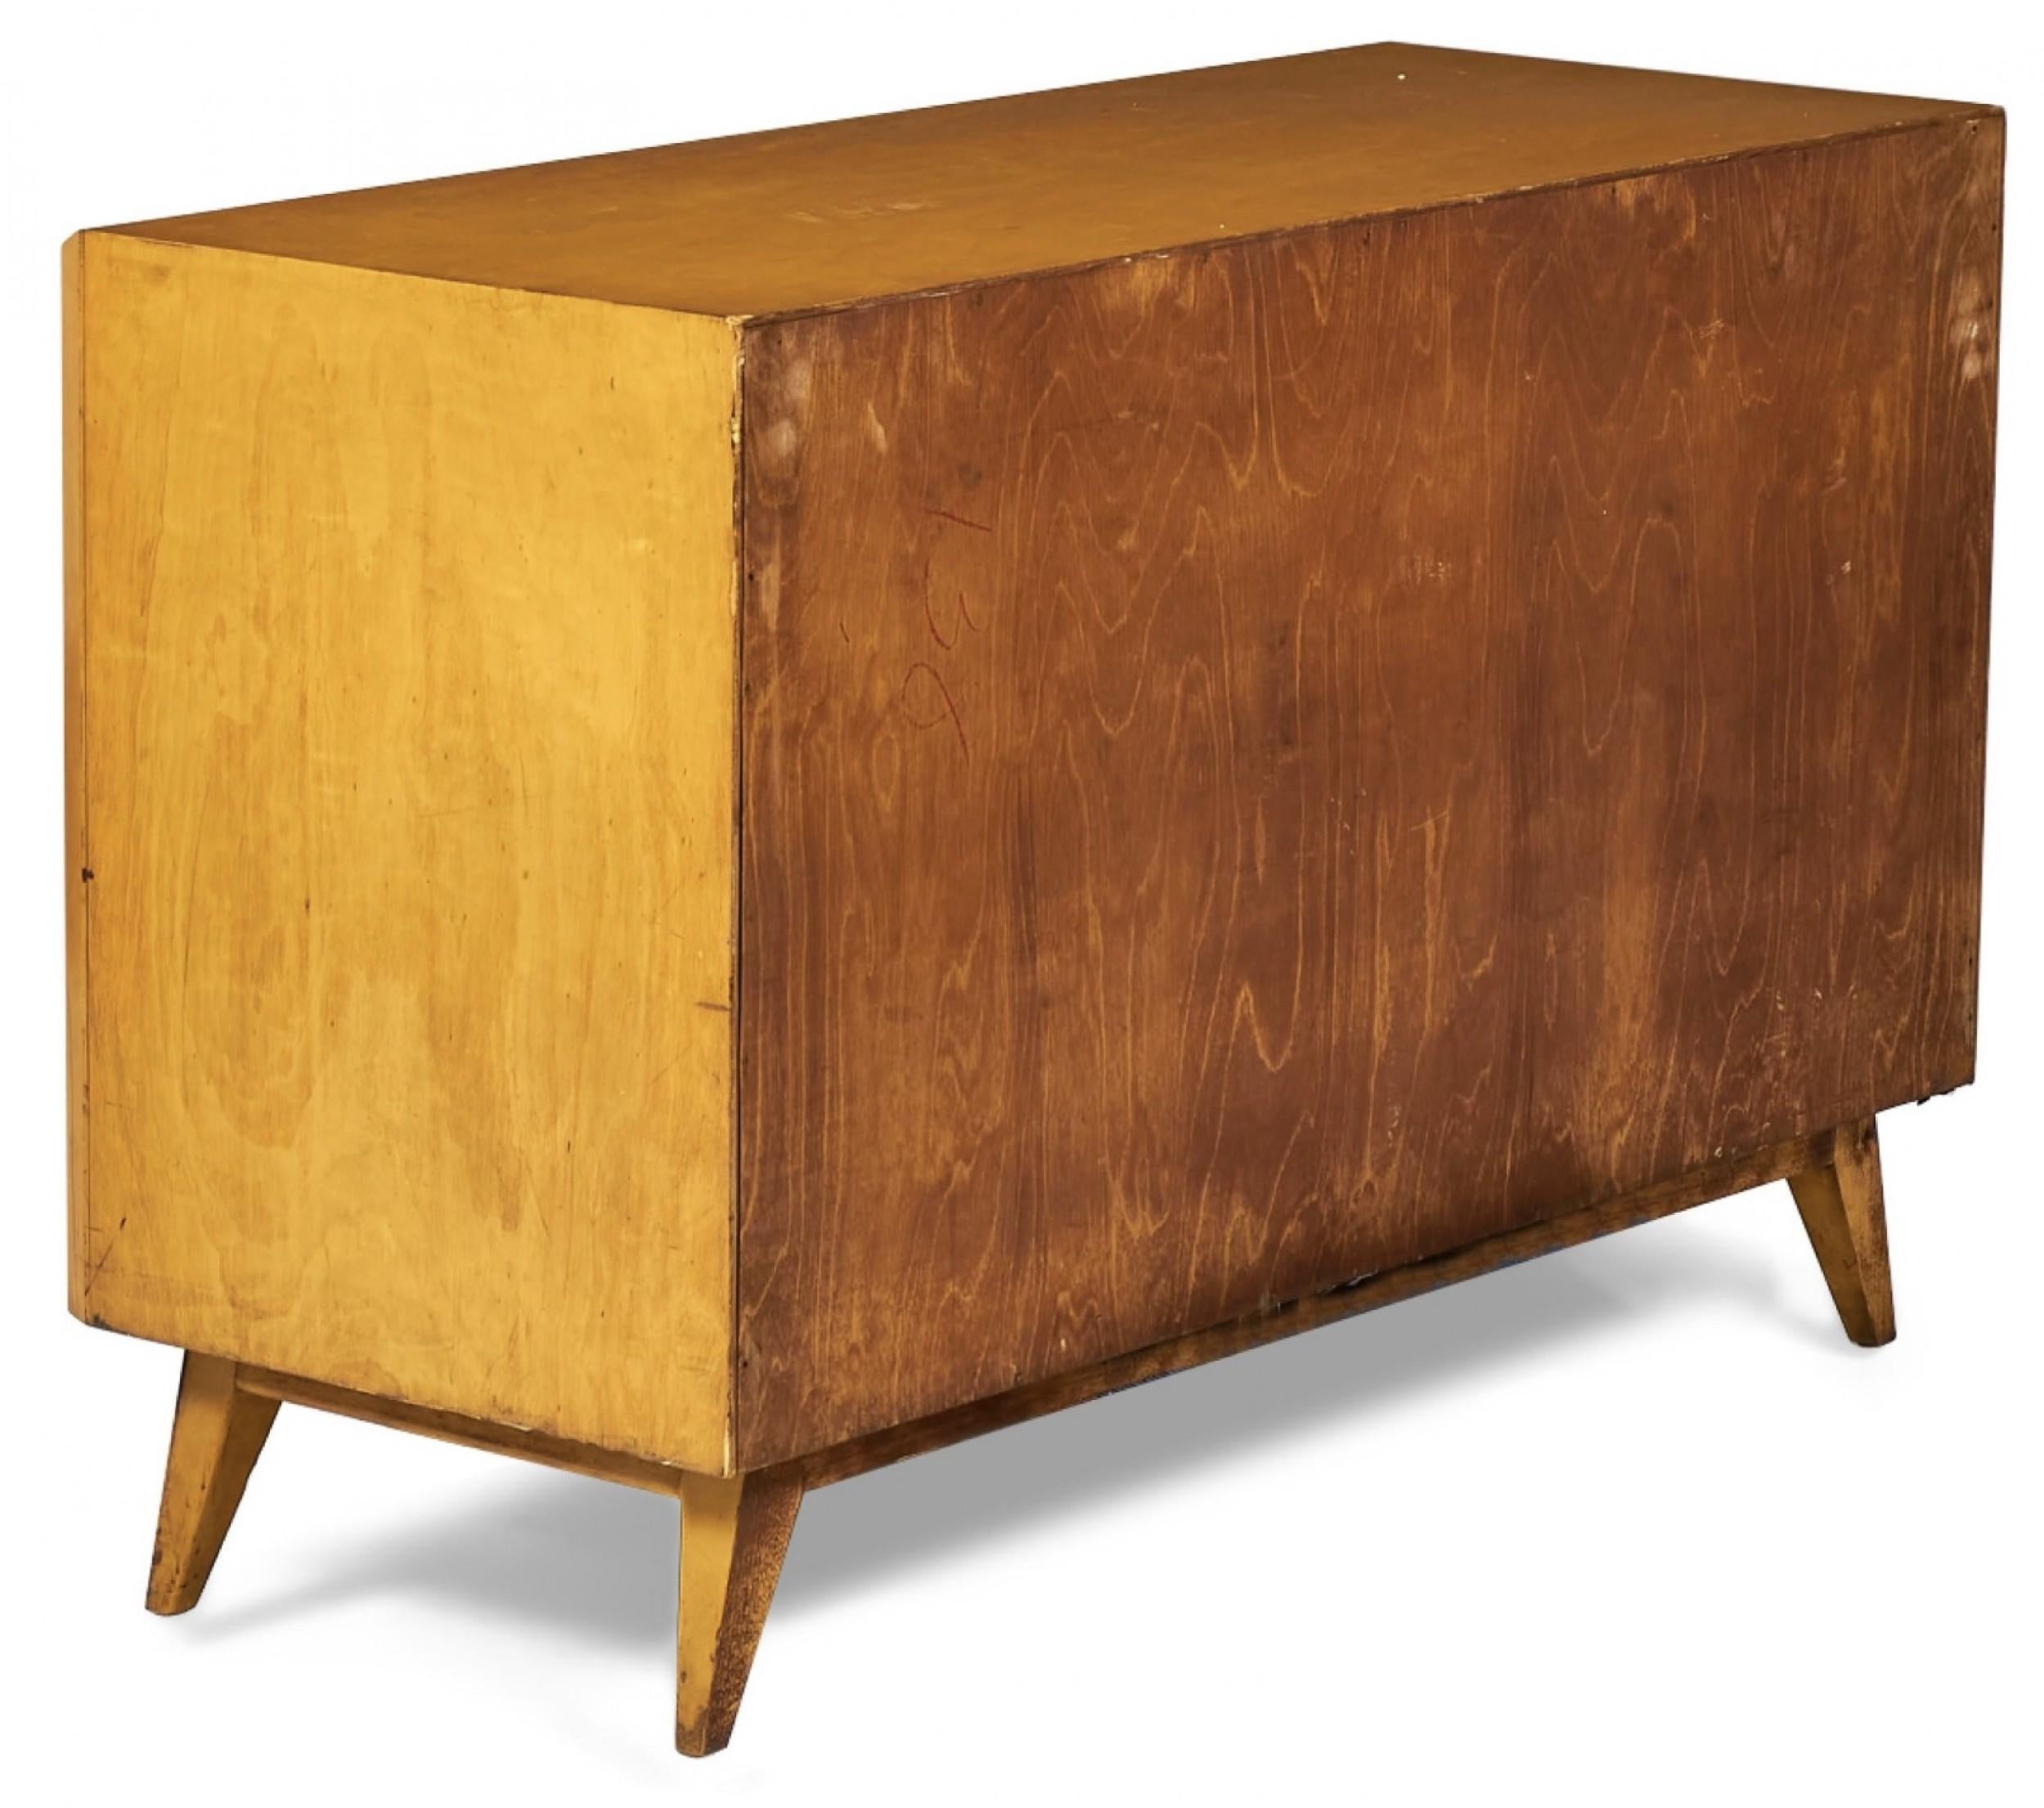 Edmond J. Spence Midcentury Swedish Burled Birch Wavefront Chest In Good Condition For Sale In New York, NY